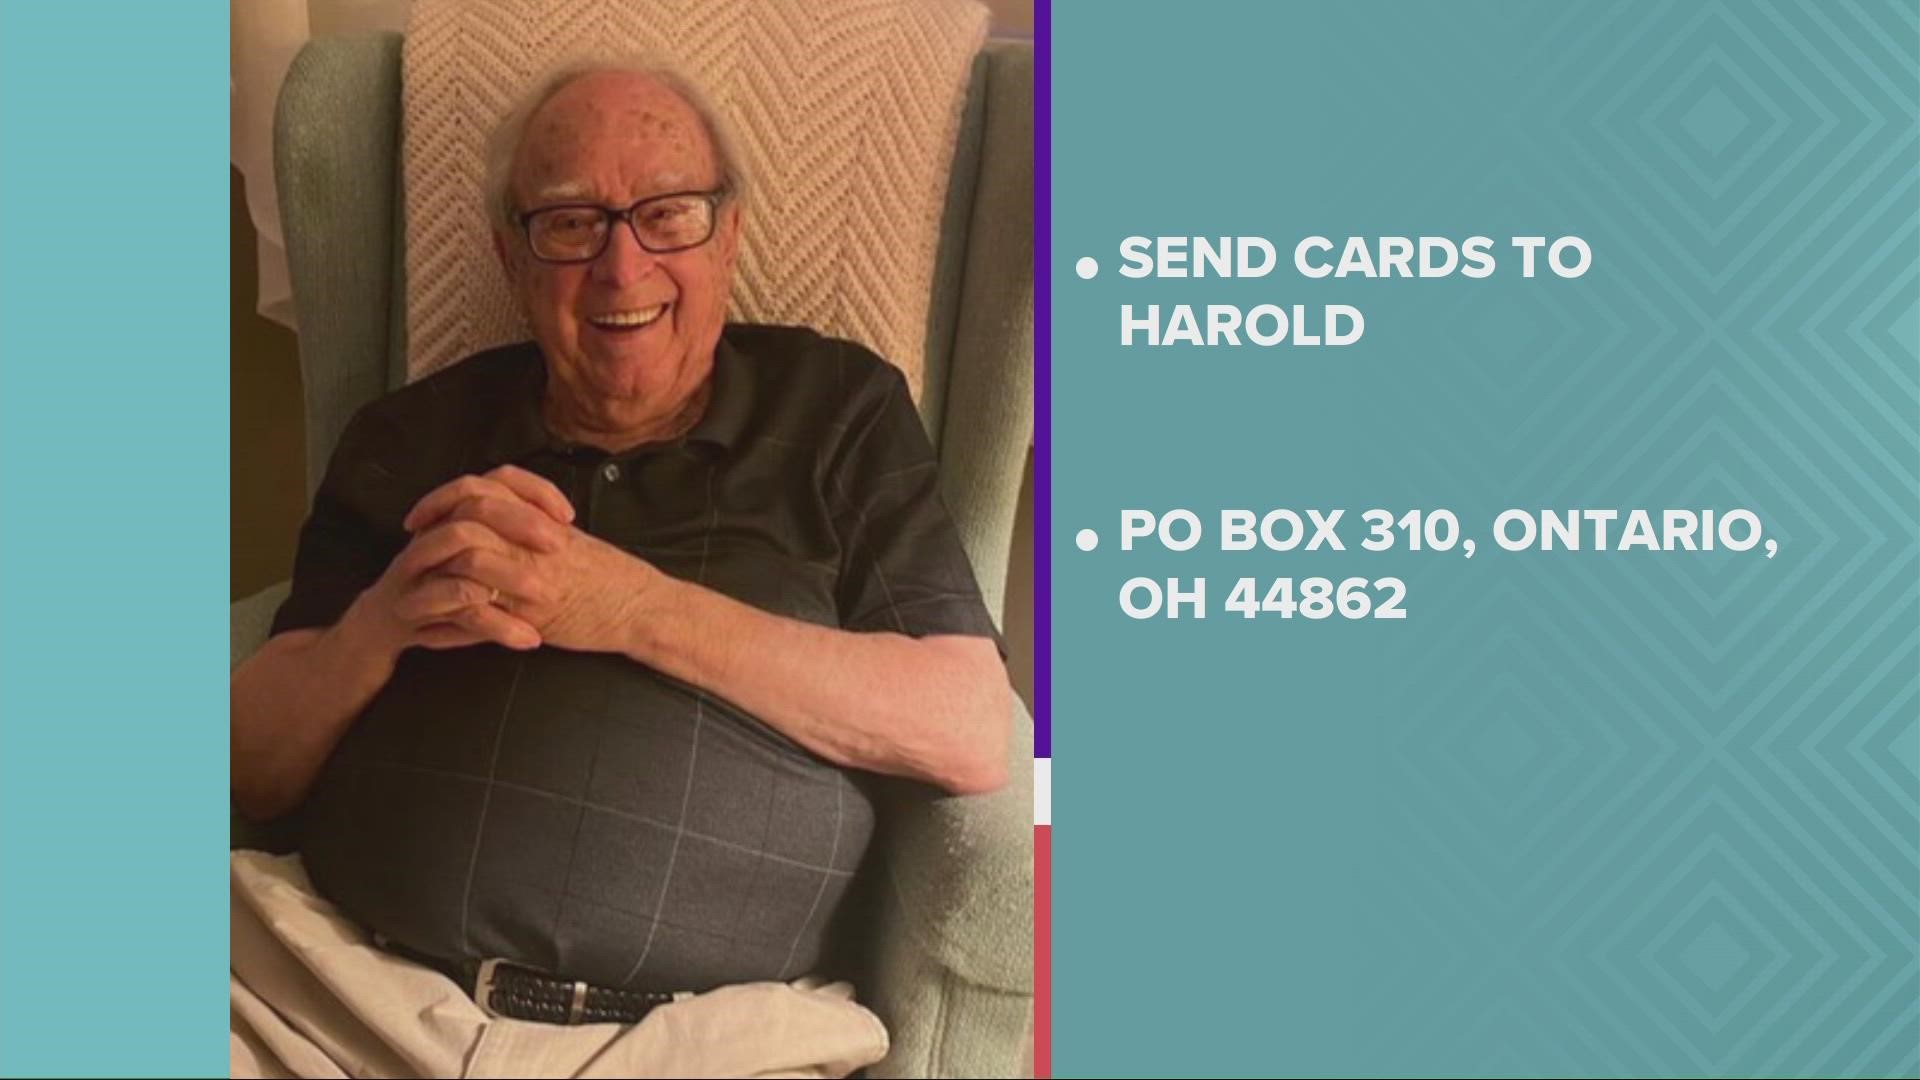 In celebration of his birthday, Harold's family is hoping to get him 100 birthday cards by the end of May.